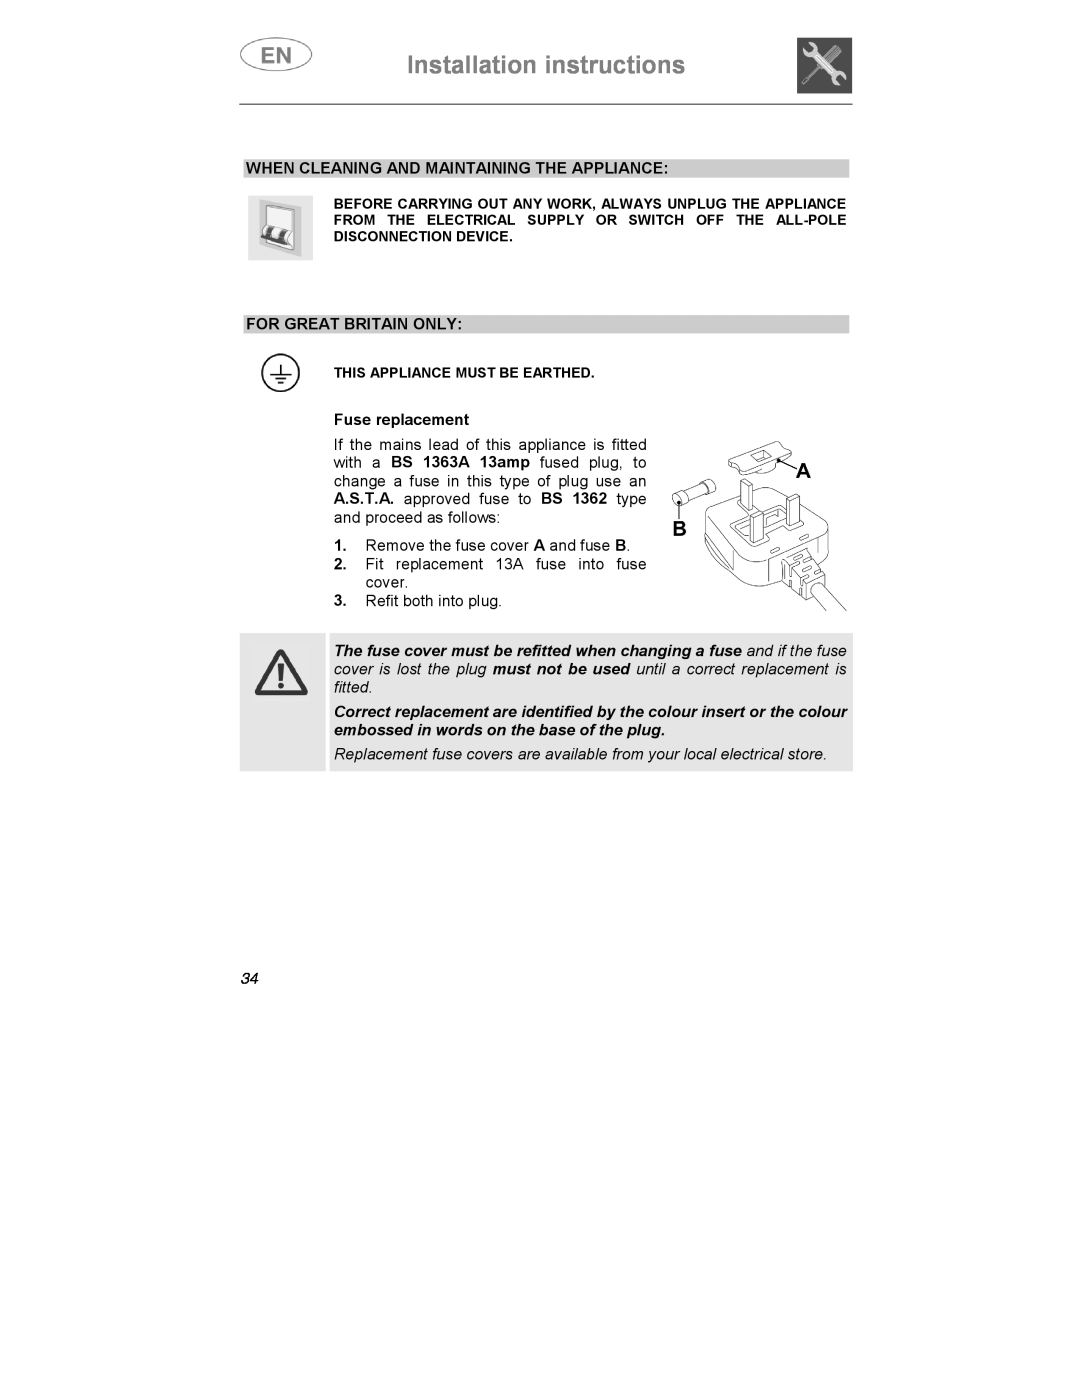 Smeg SDCY66-1, SDCY66X1 Installation instructions, When Cleaning And Maintaining The Appliance, For Great Britain Only 